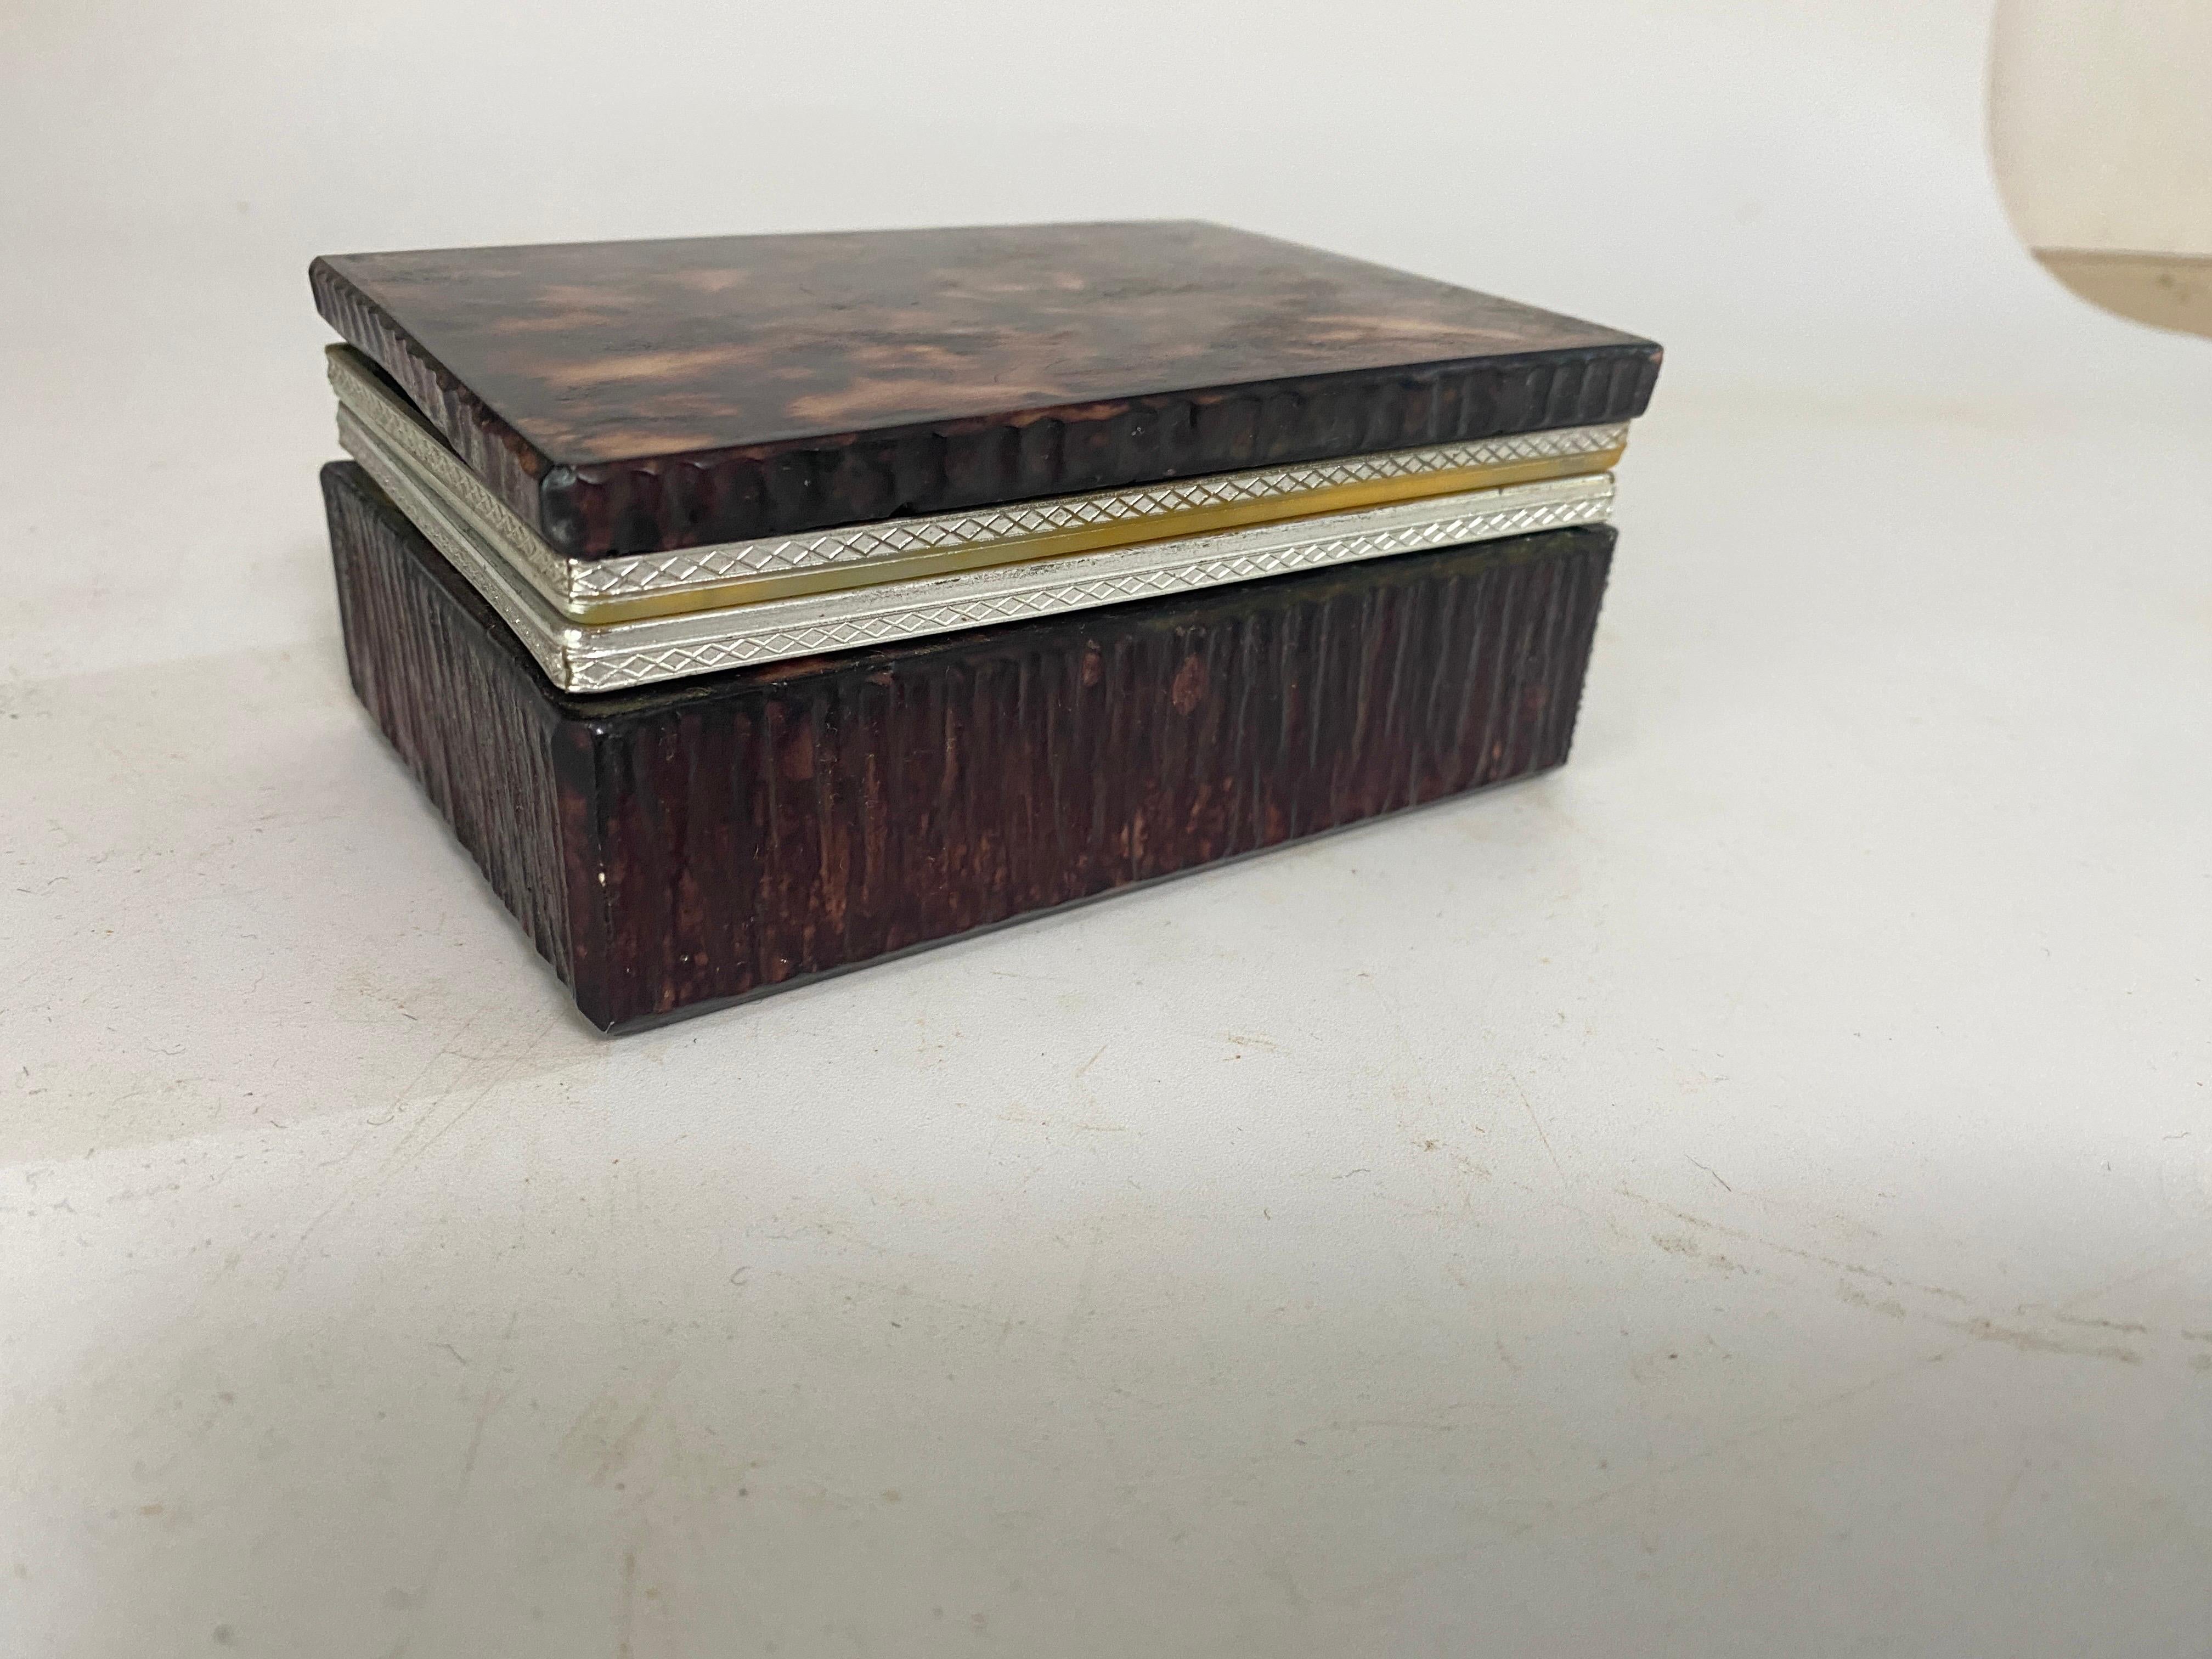 Onyx Box Decorative or Jewelry Box Brown Color Made in Italy circa 1970 For Sale 1